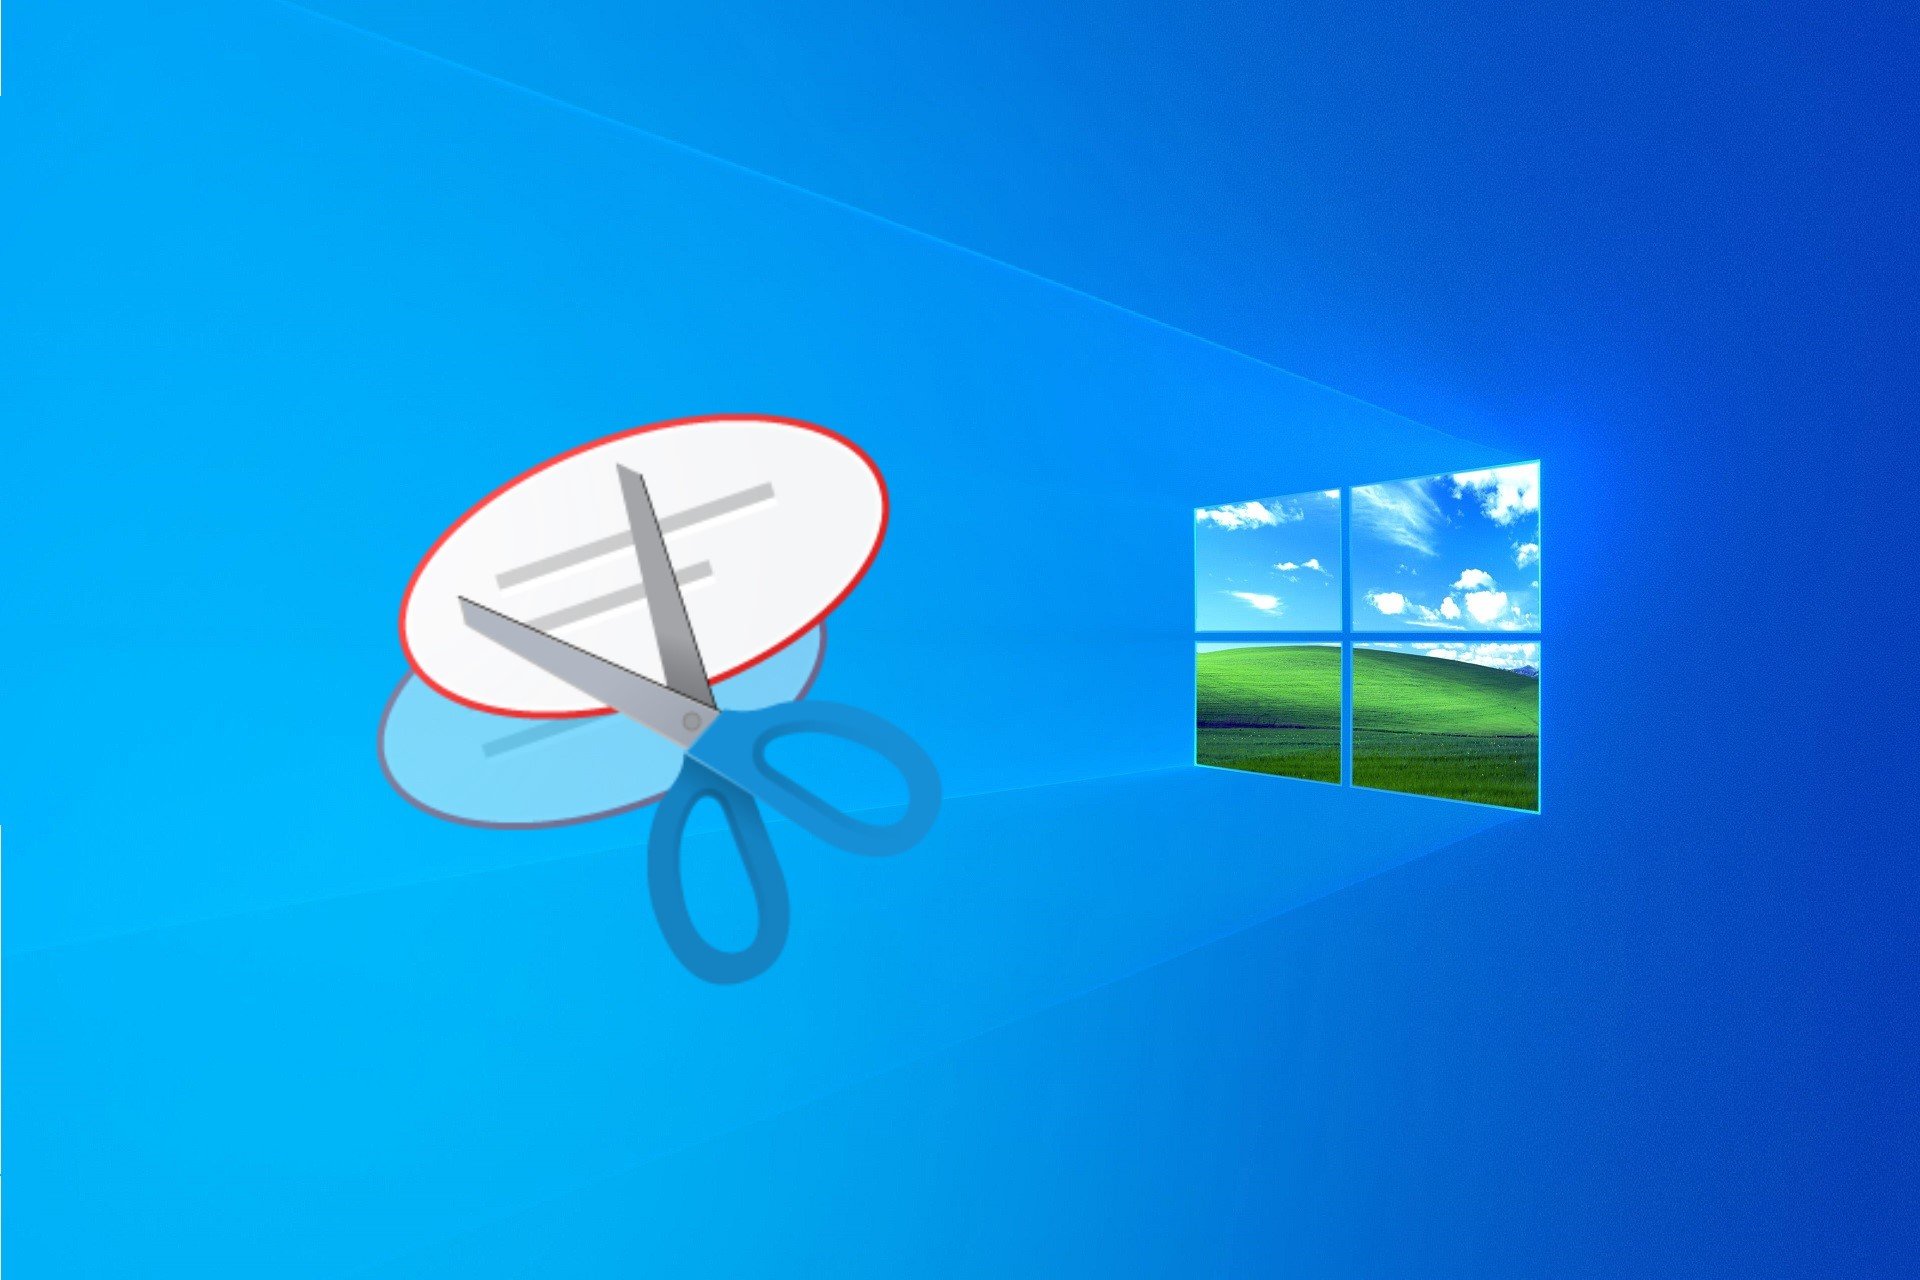 snipping tool is moving windows 10